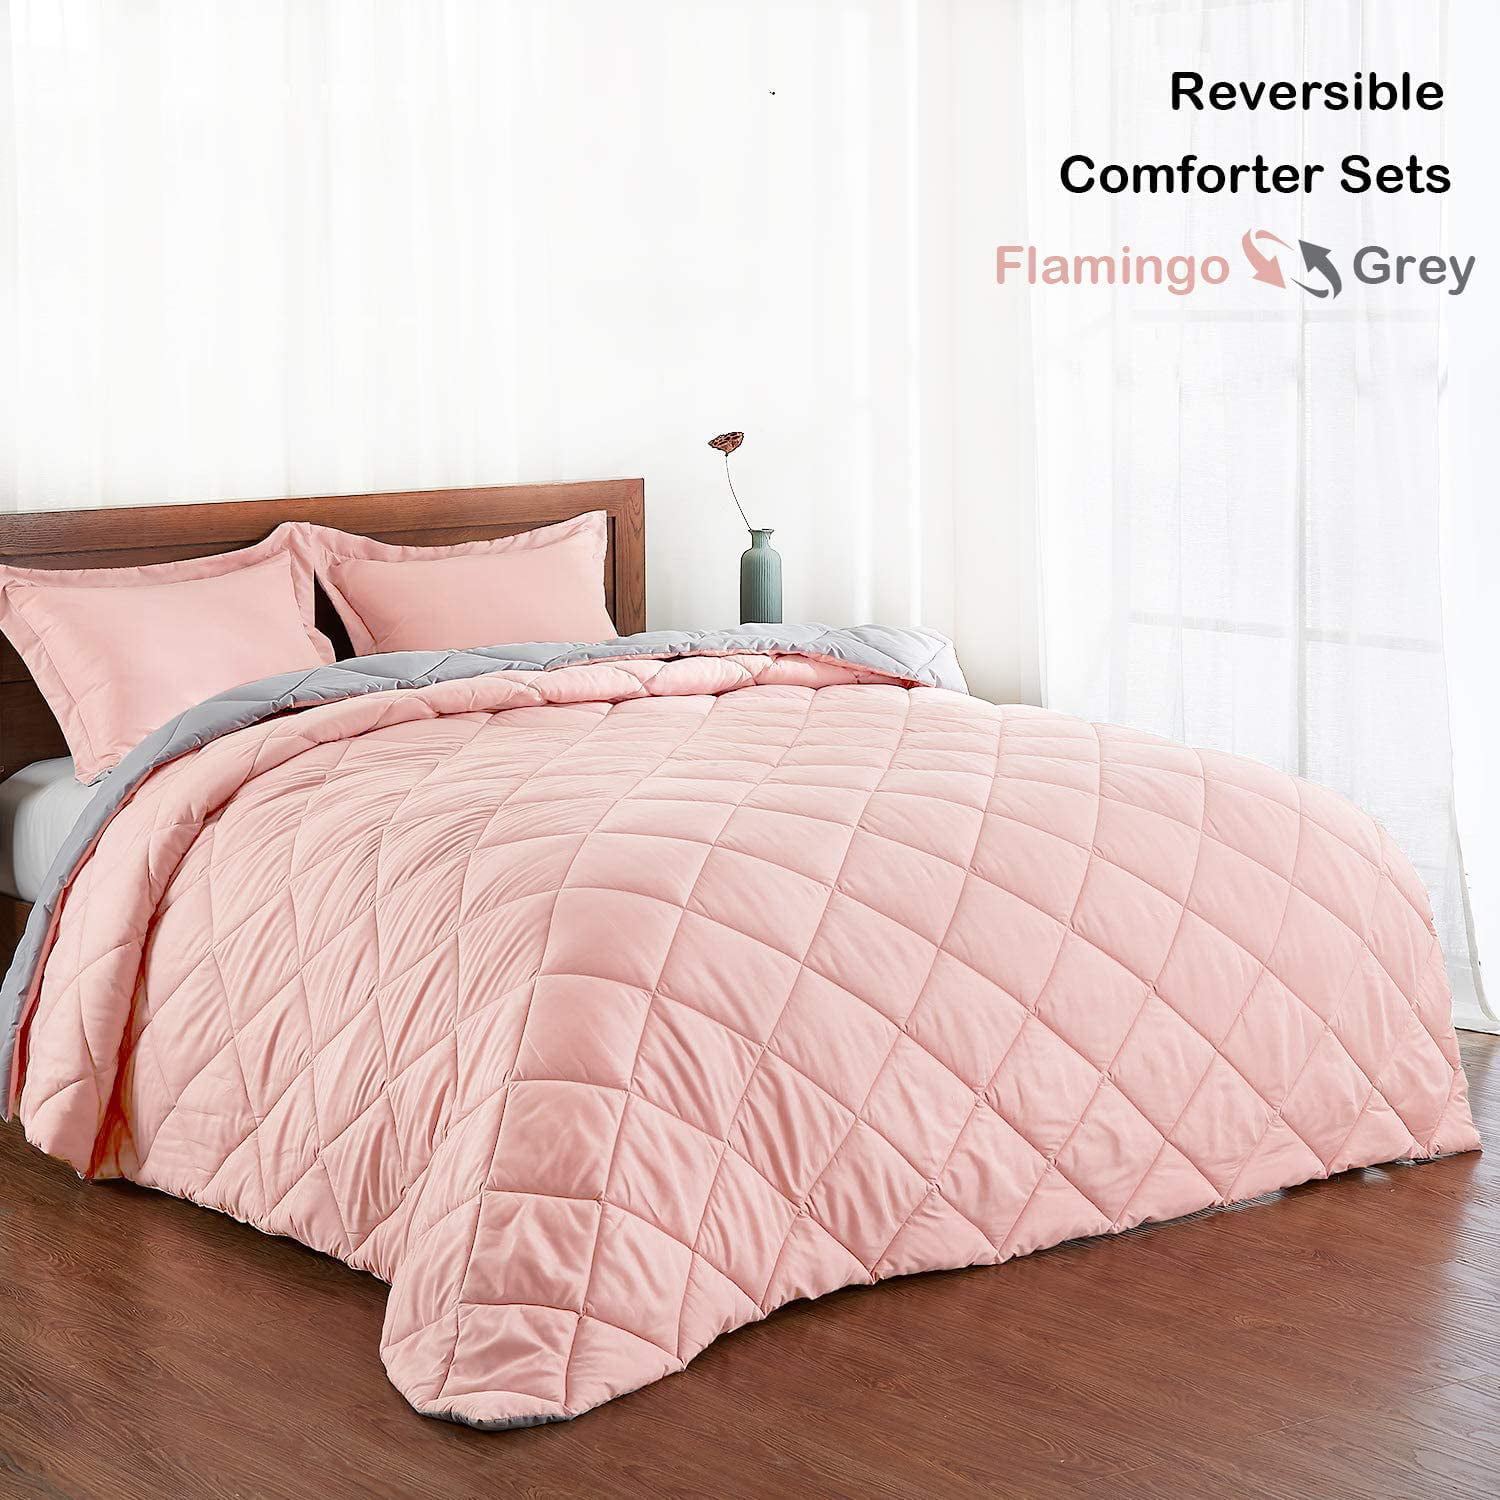 Basic Beyond Down Alternative Comforter Set Reversible Bed Comforter for All Seasons with 1 Pillow Sham Twin, Coral/Grey